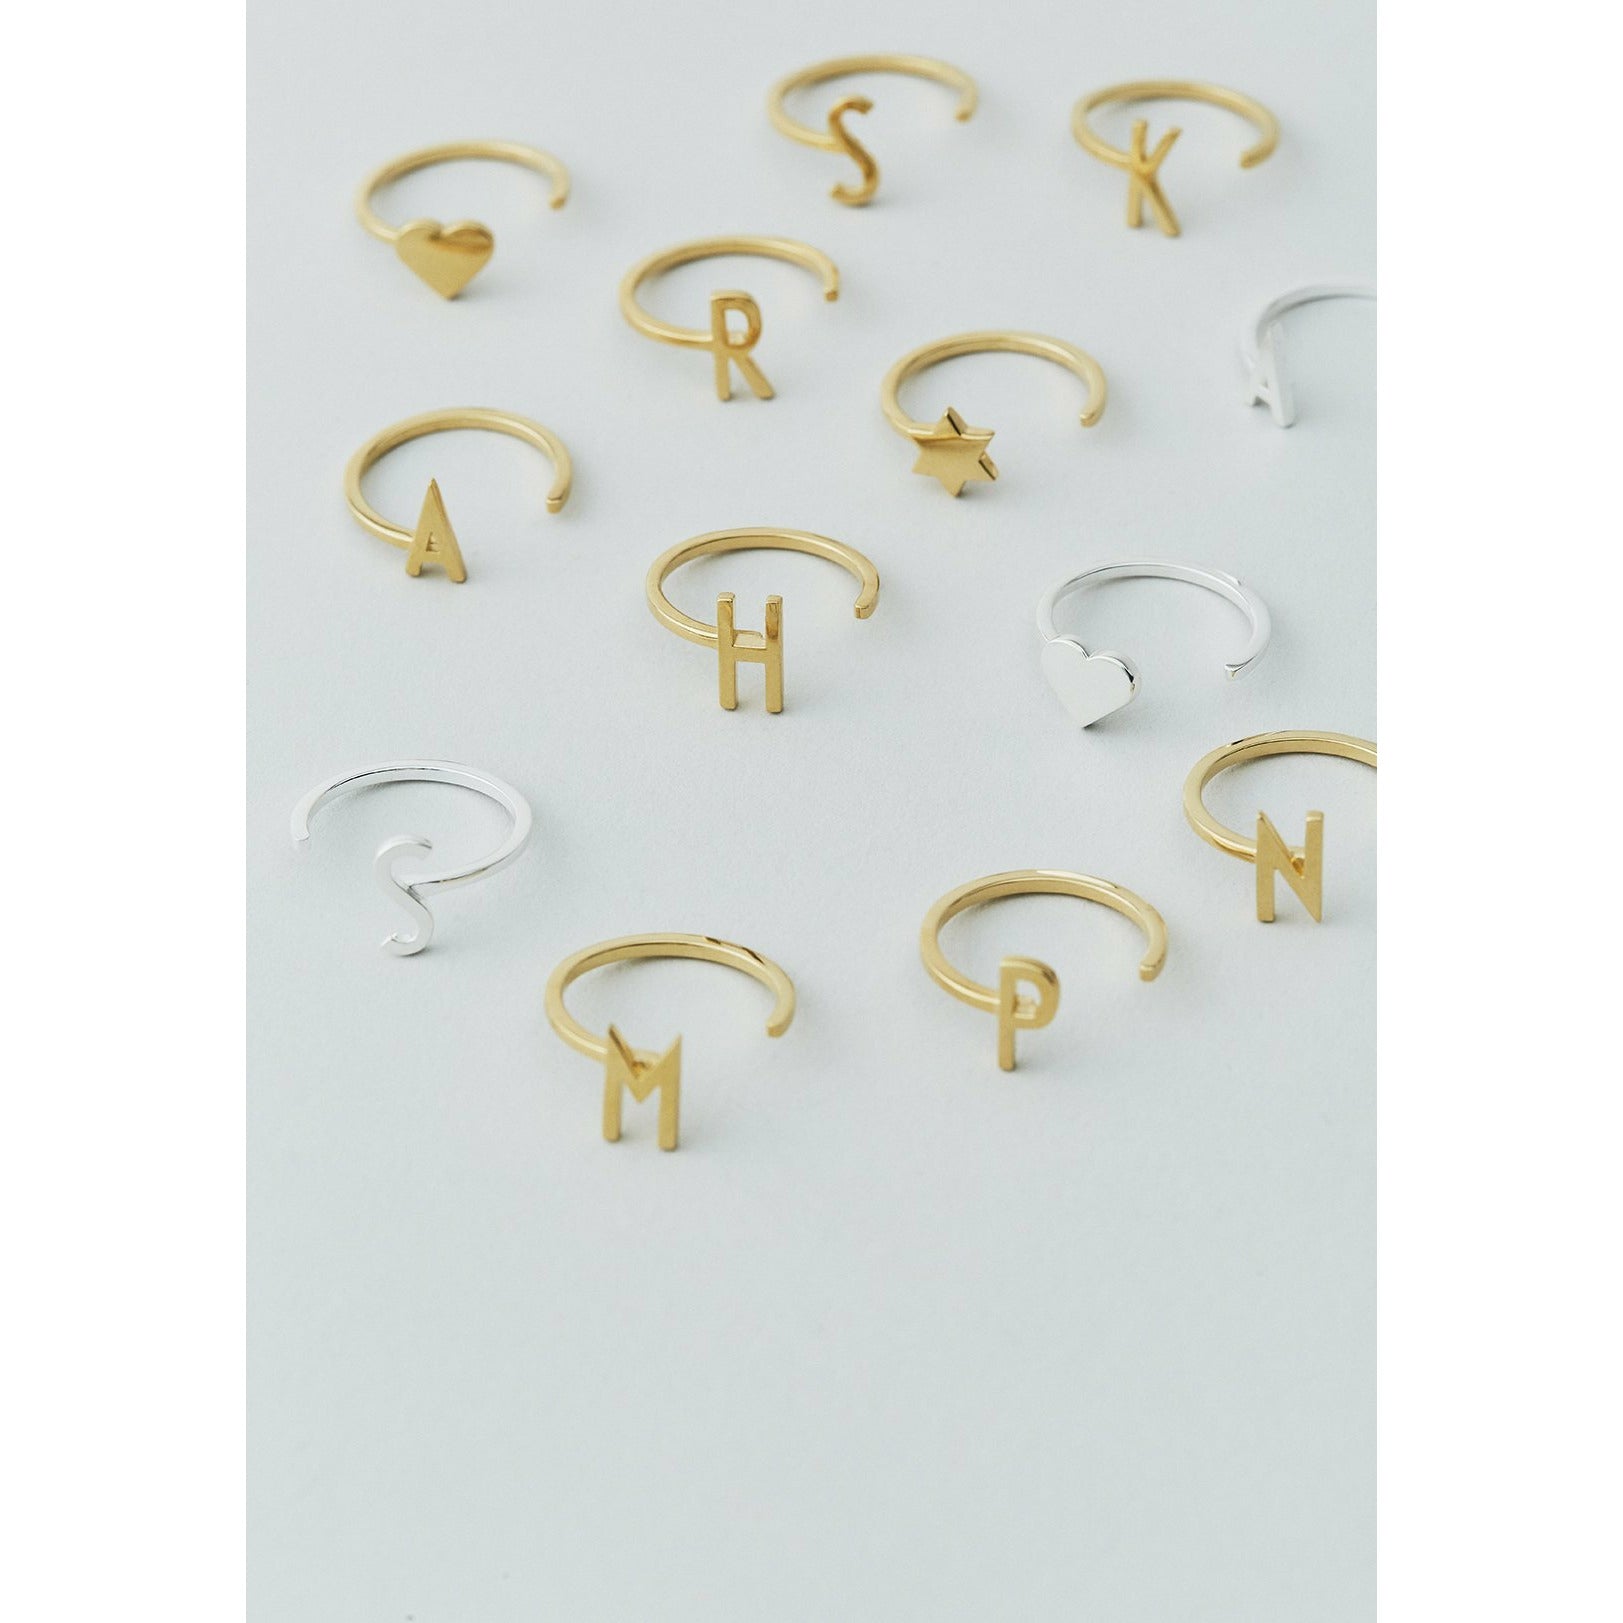 Design Letters LITERATION A-Z, 18K GOLD PLATED, H